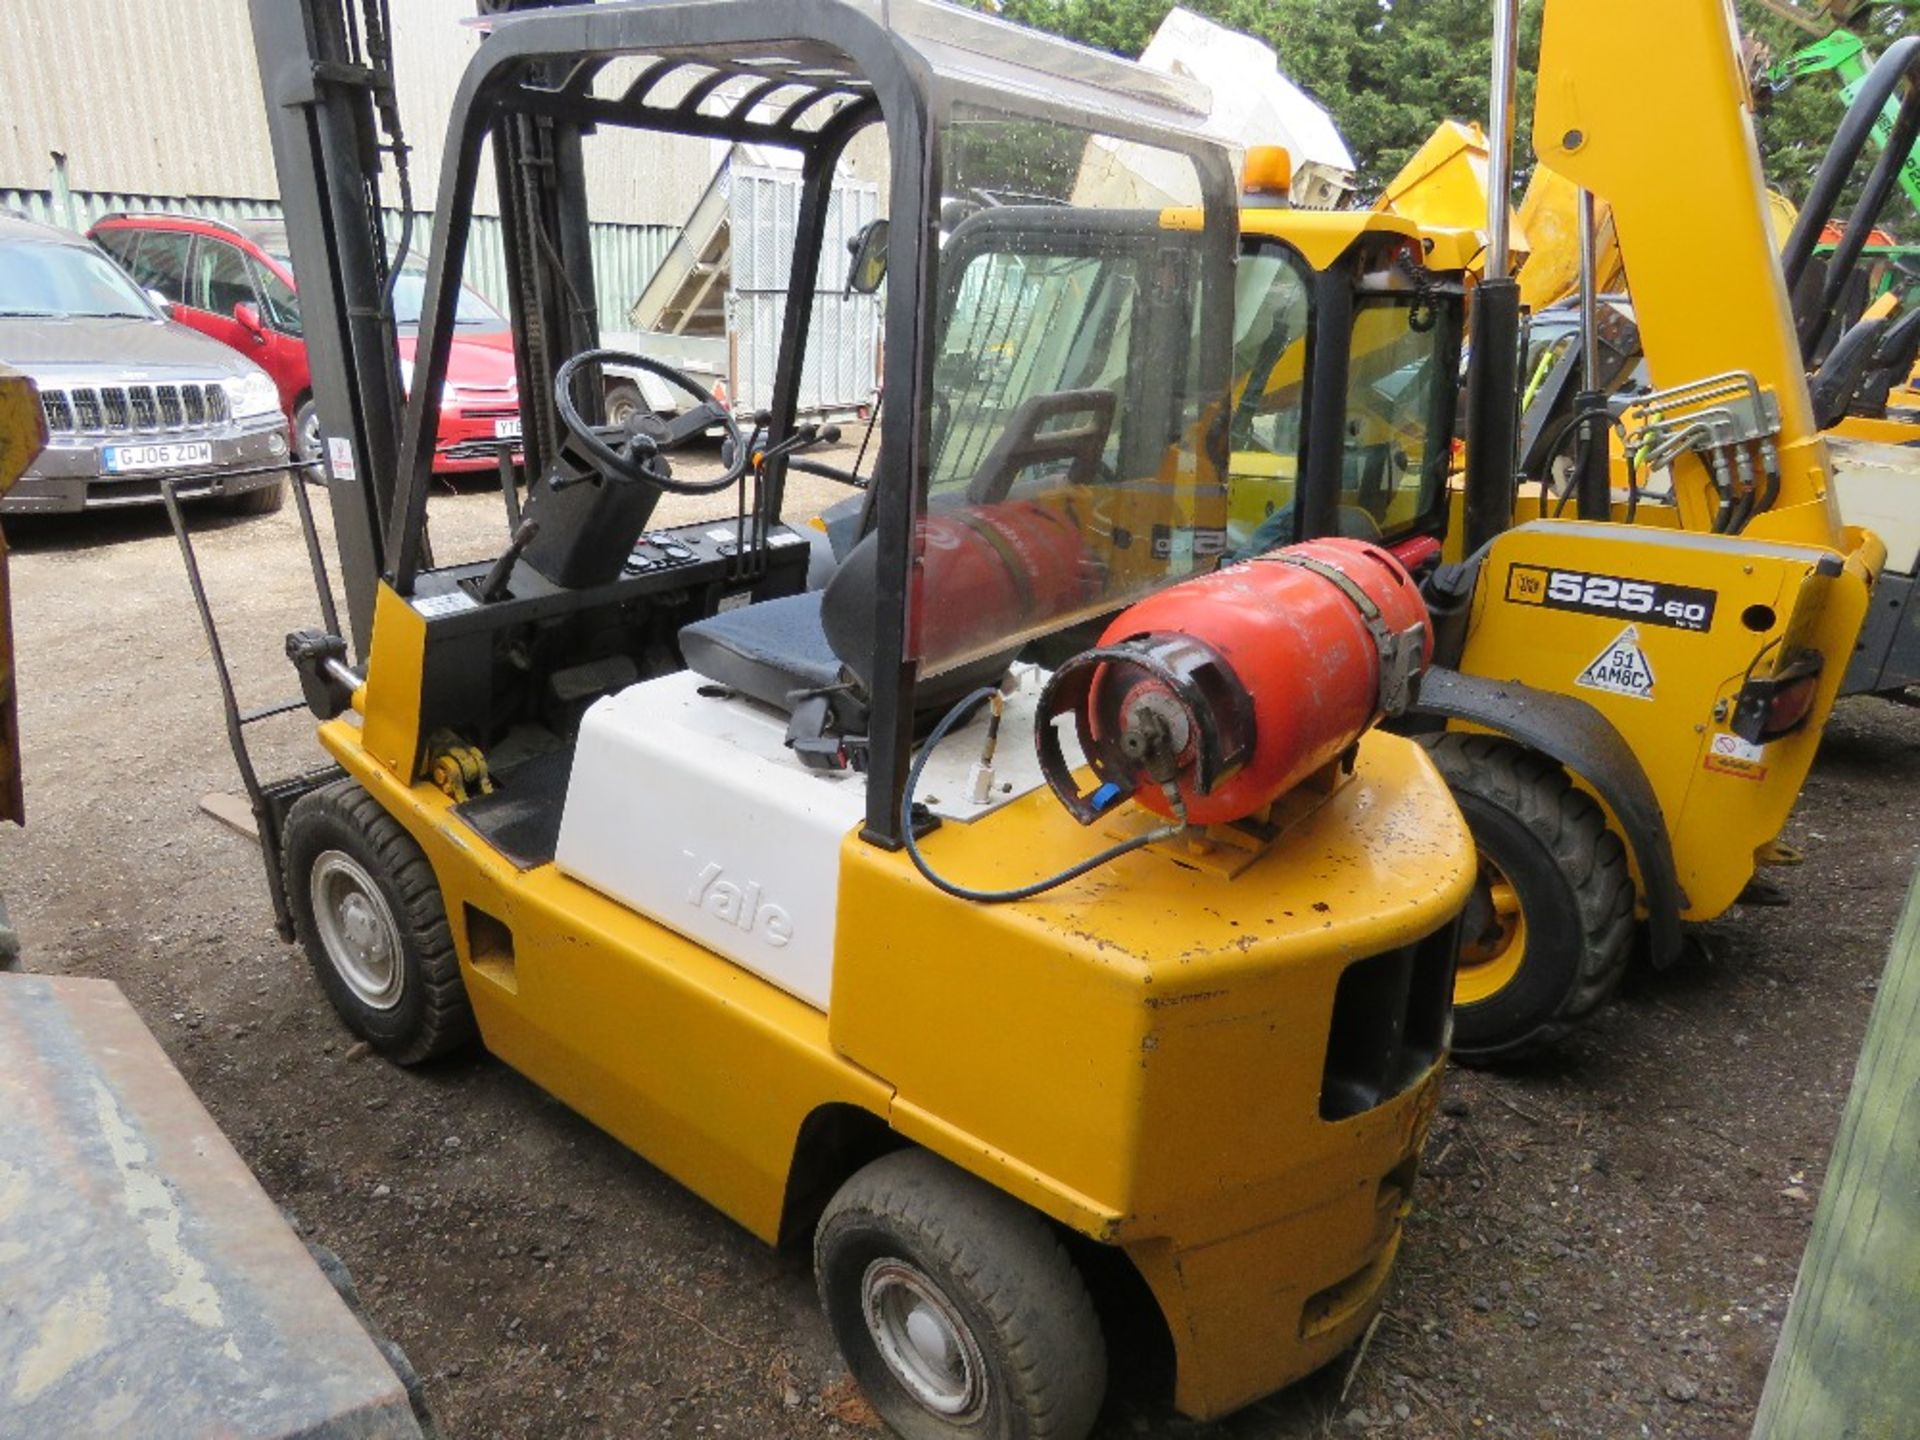 YALE GAS POWERED 2.5TONNE FORKLIFT WITH SIDE SHIFT. WHEN TESTED WAS SEEN TO START, DRIVE, STEER, LIF